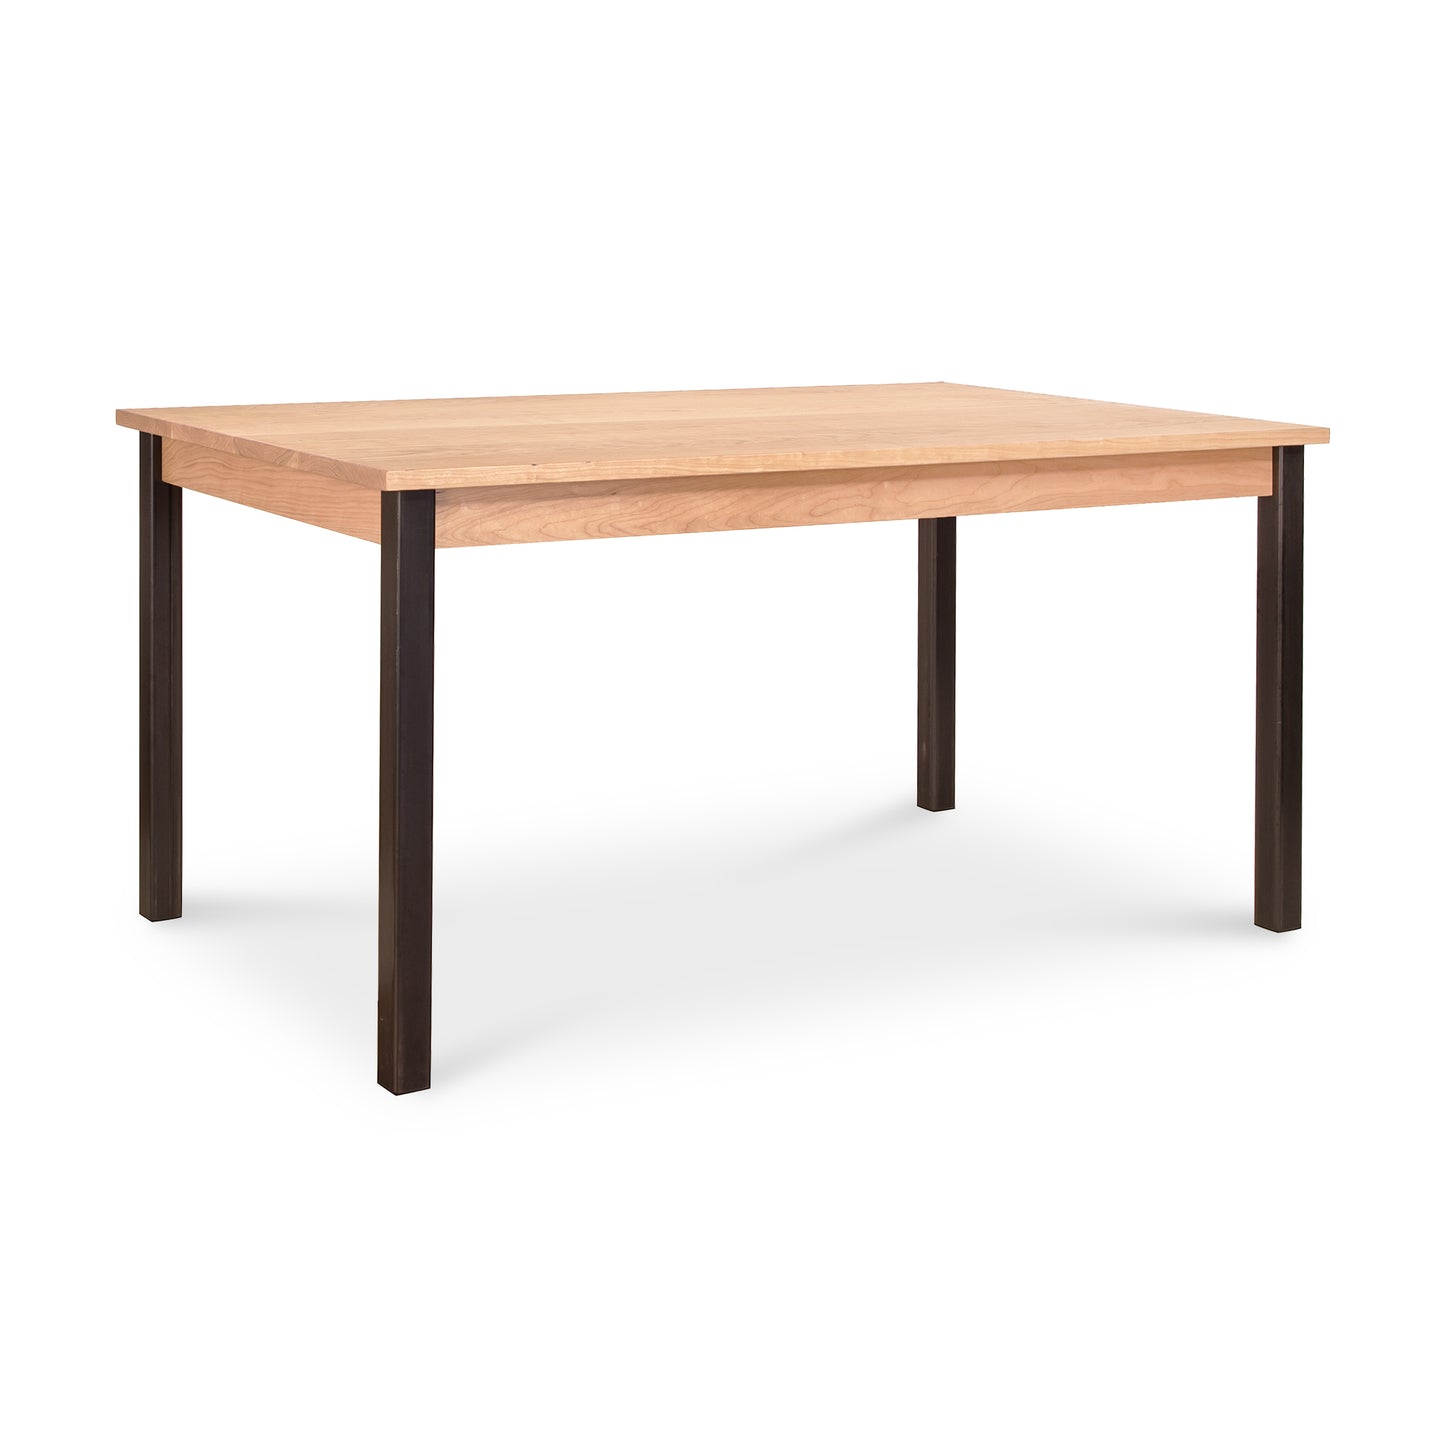 A wooden table with black legs on a white background.